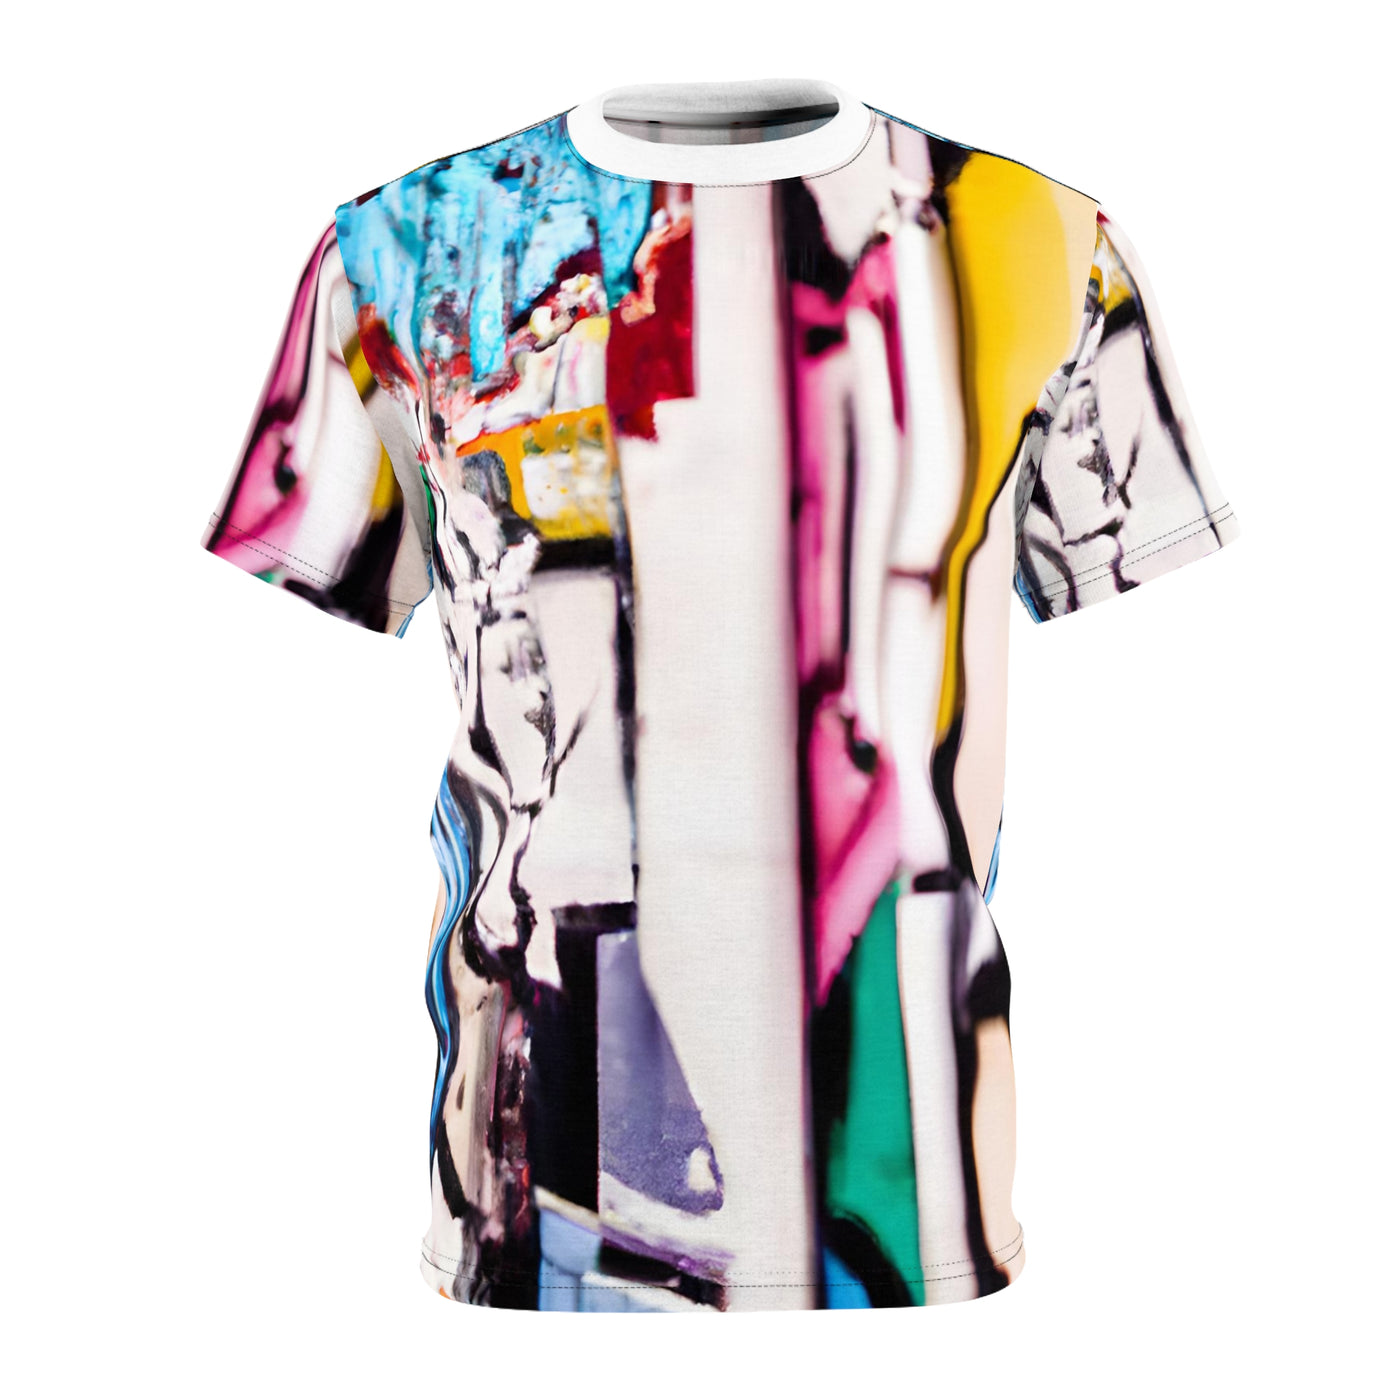 scape

"Clad in Urban Shimmers: A Glittering City Unisex Cut & Sew Tee